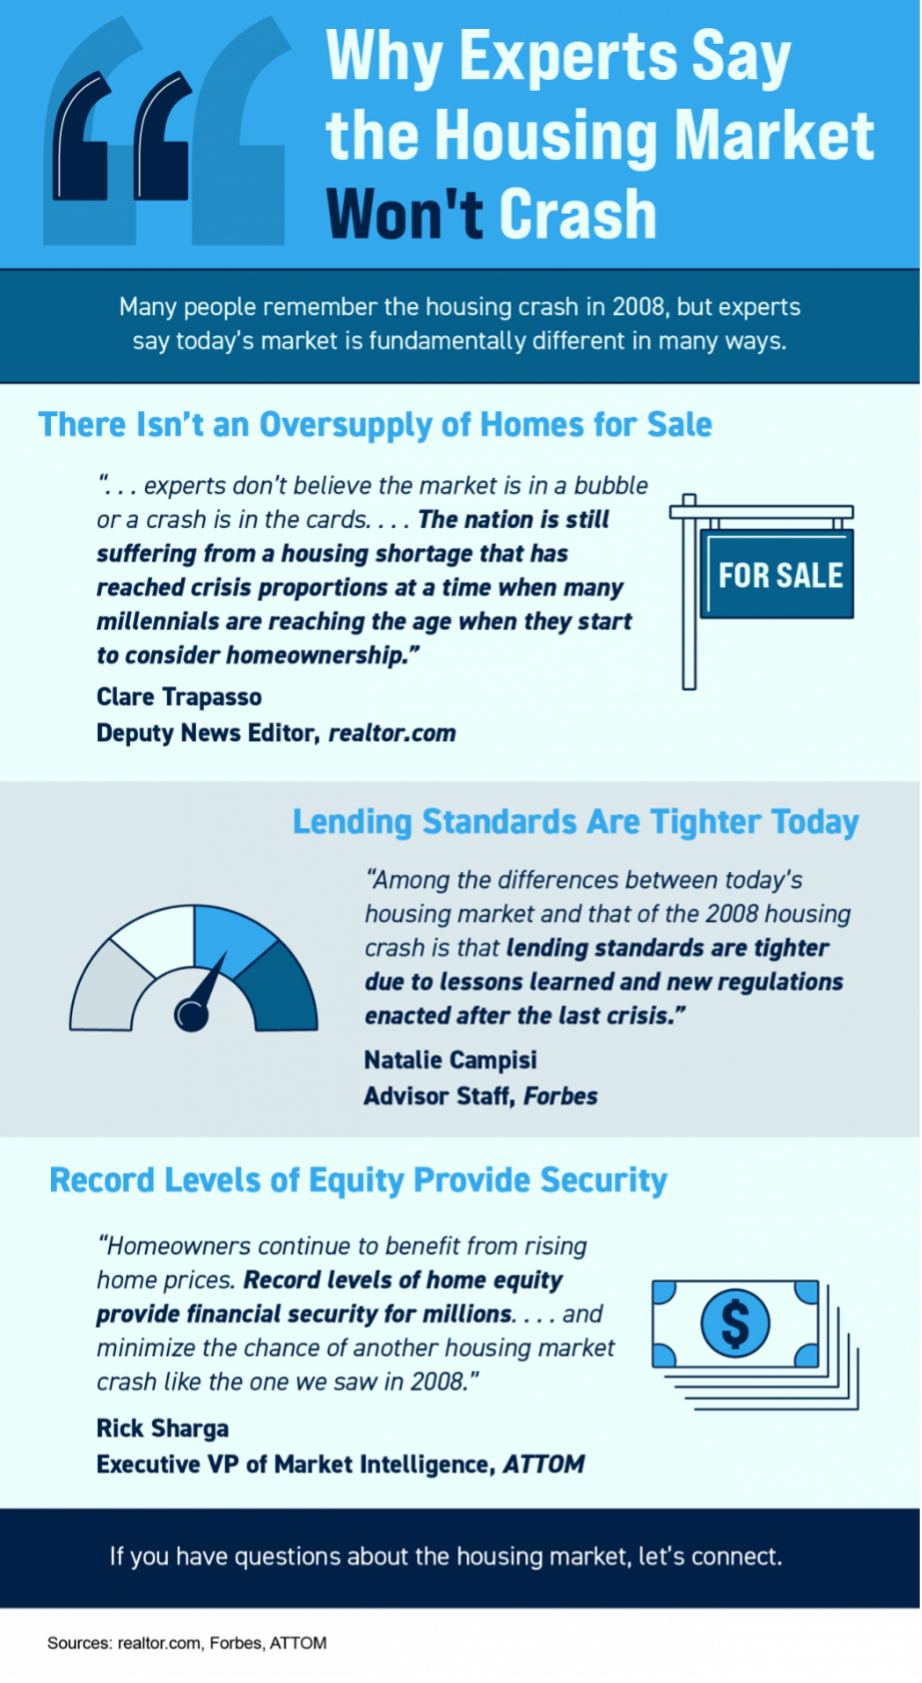 Why experts say the housing market won't crash infographic